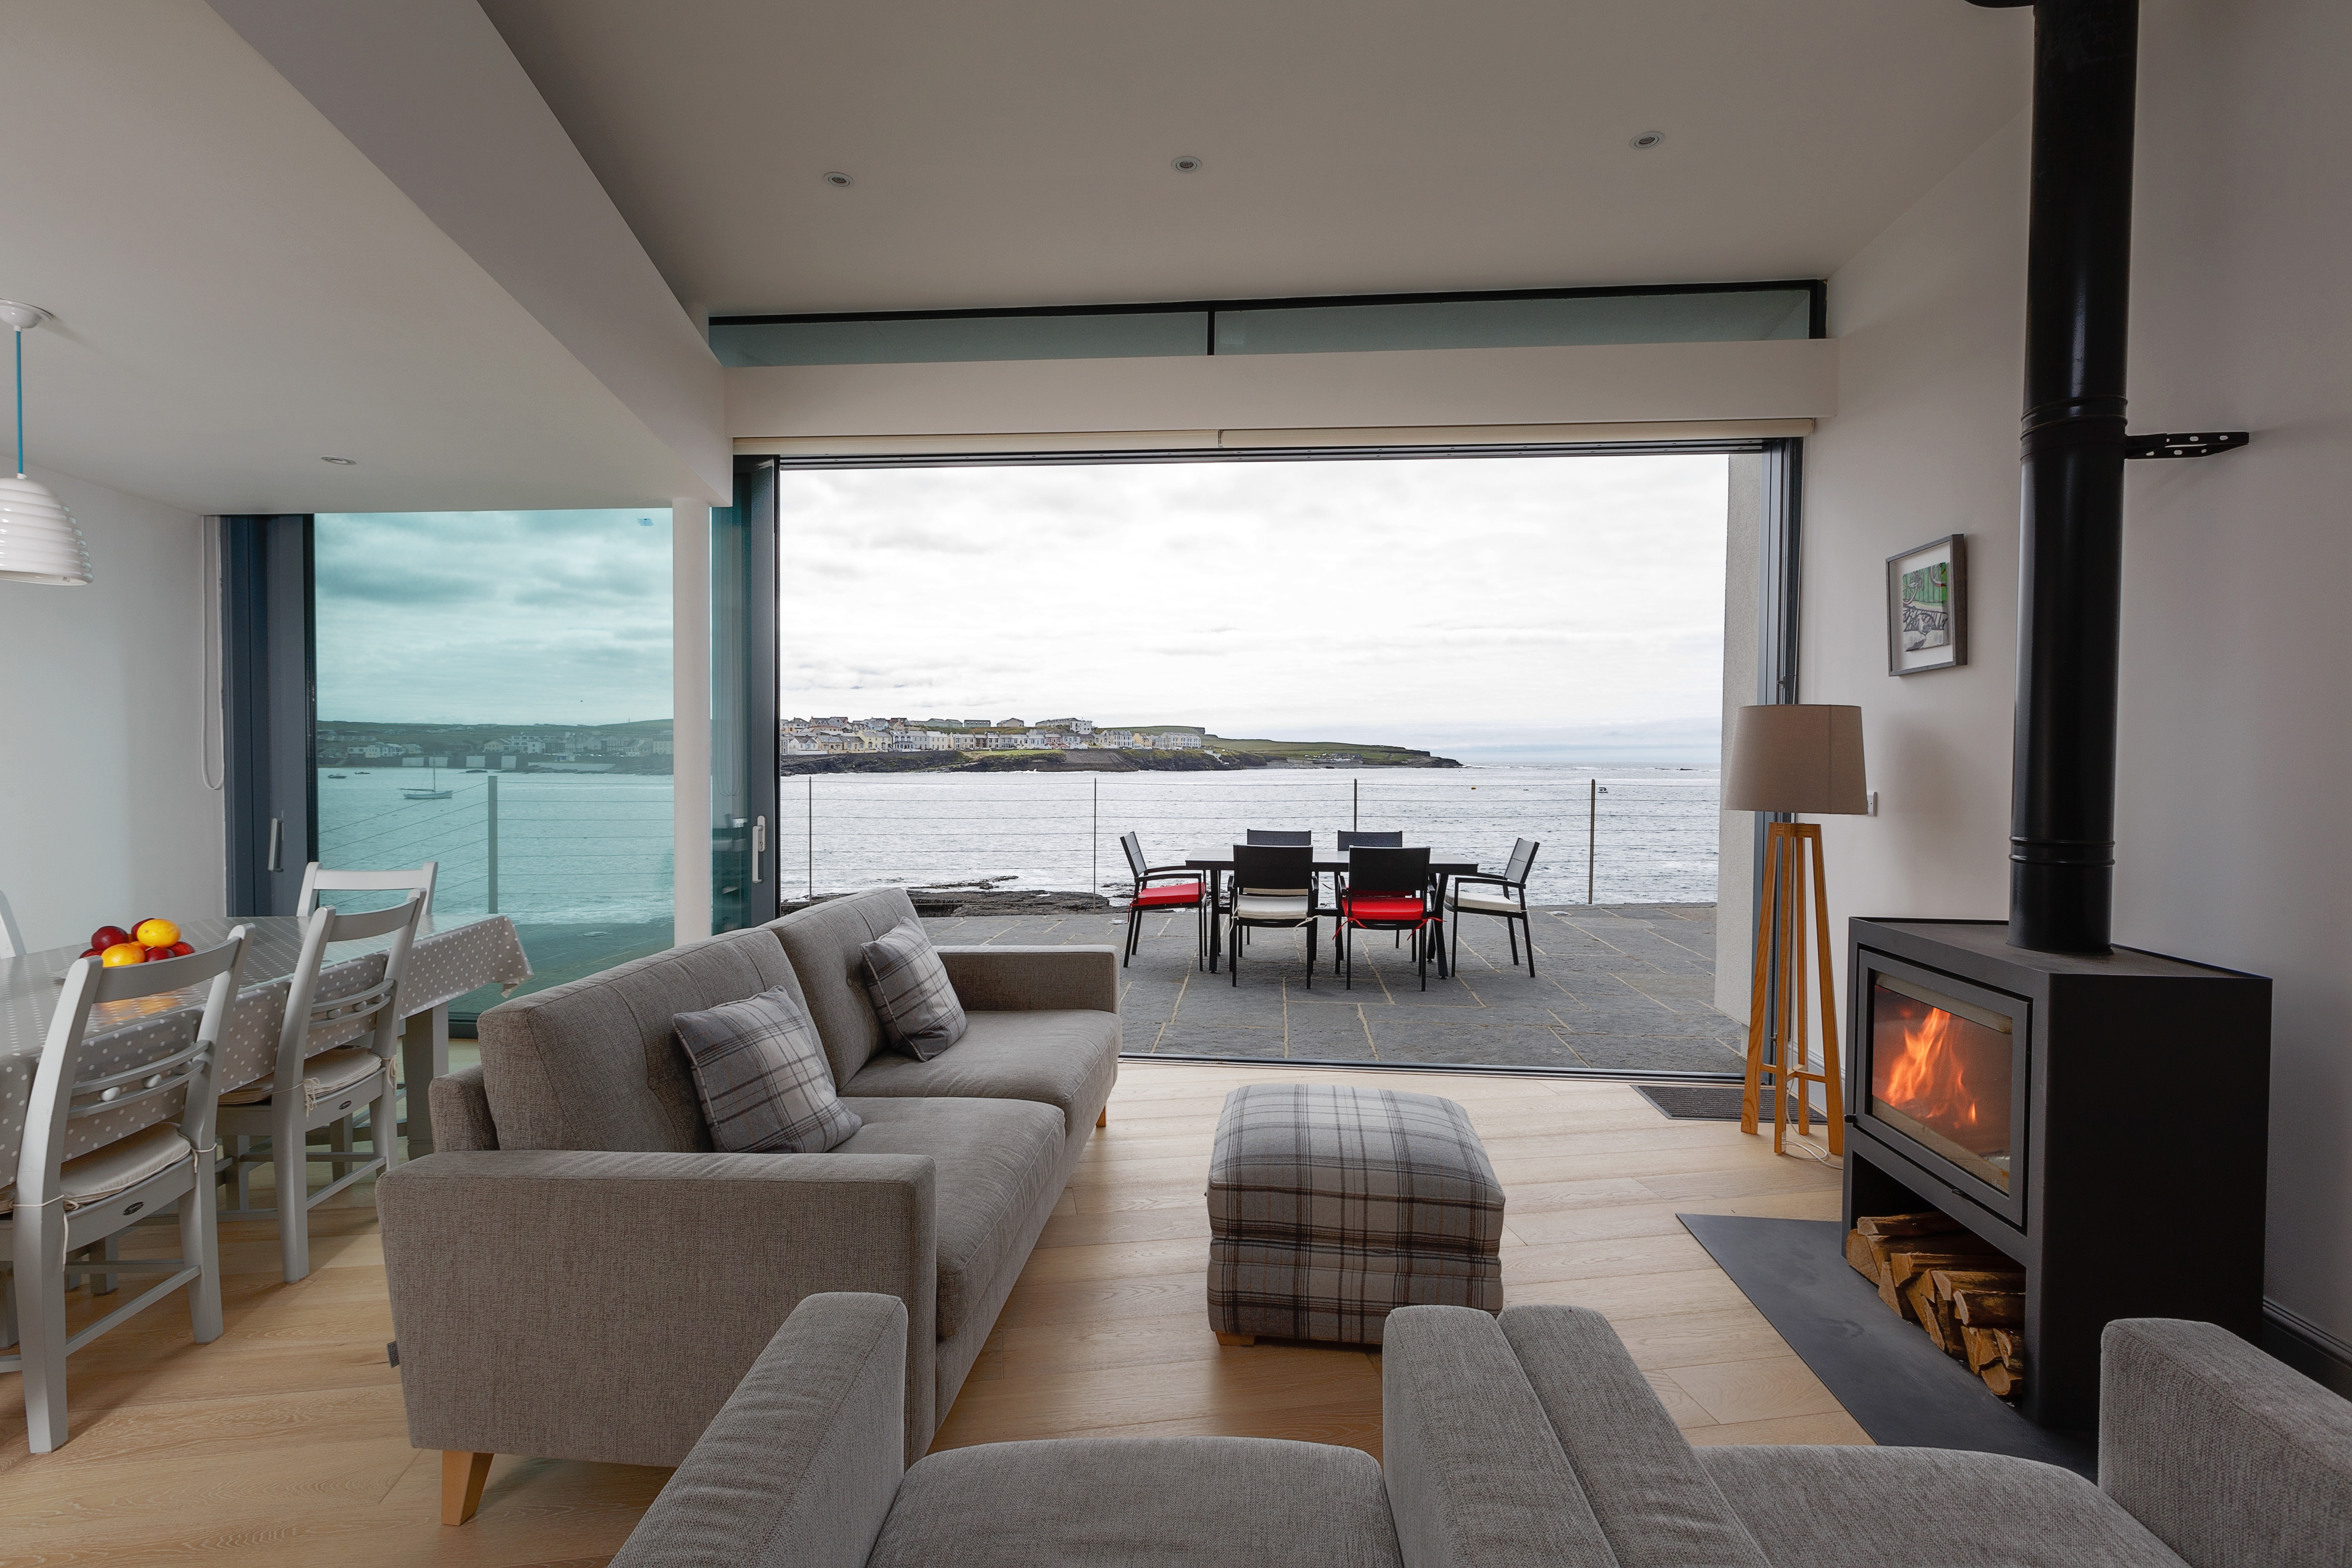 Spectacular Cliff Cottage Kilkee - Cottages for Rent in Kilkee, Clare,  Ireland